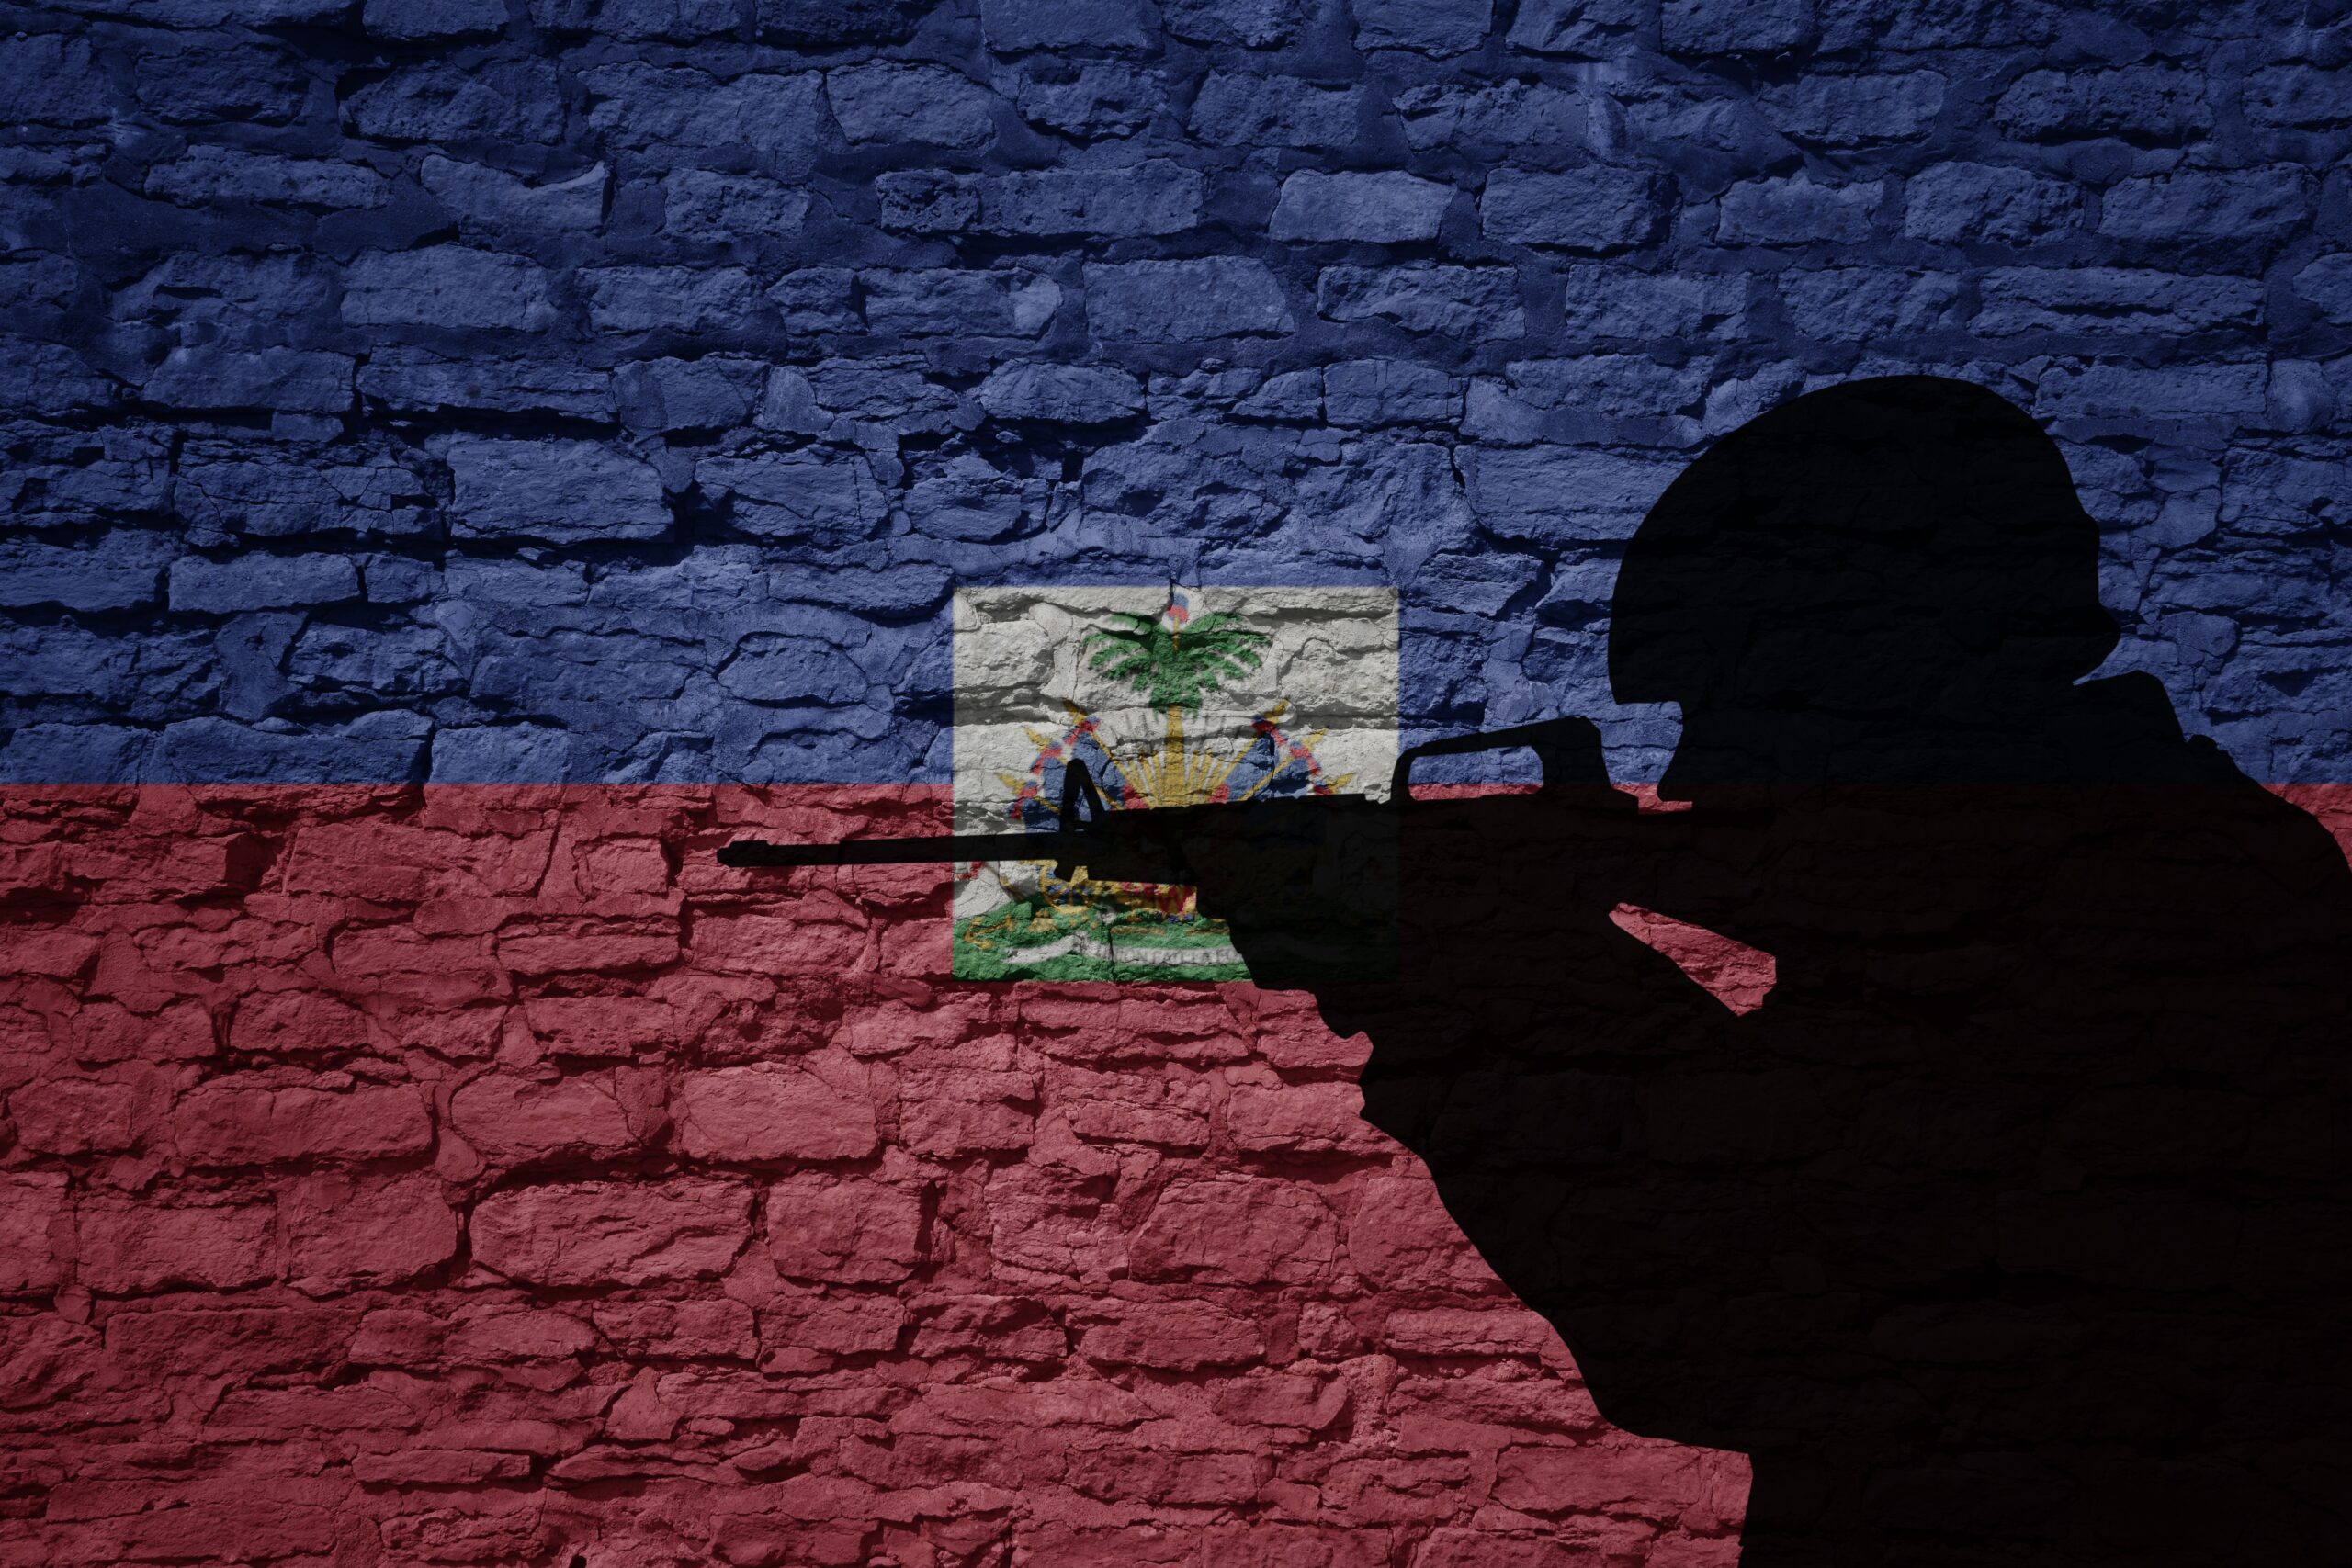 Soldier,Silhouette,On,The,Old,Brick,Wall,With,Flag,Of